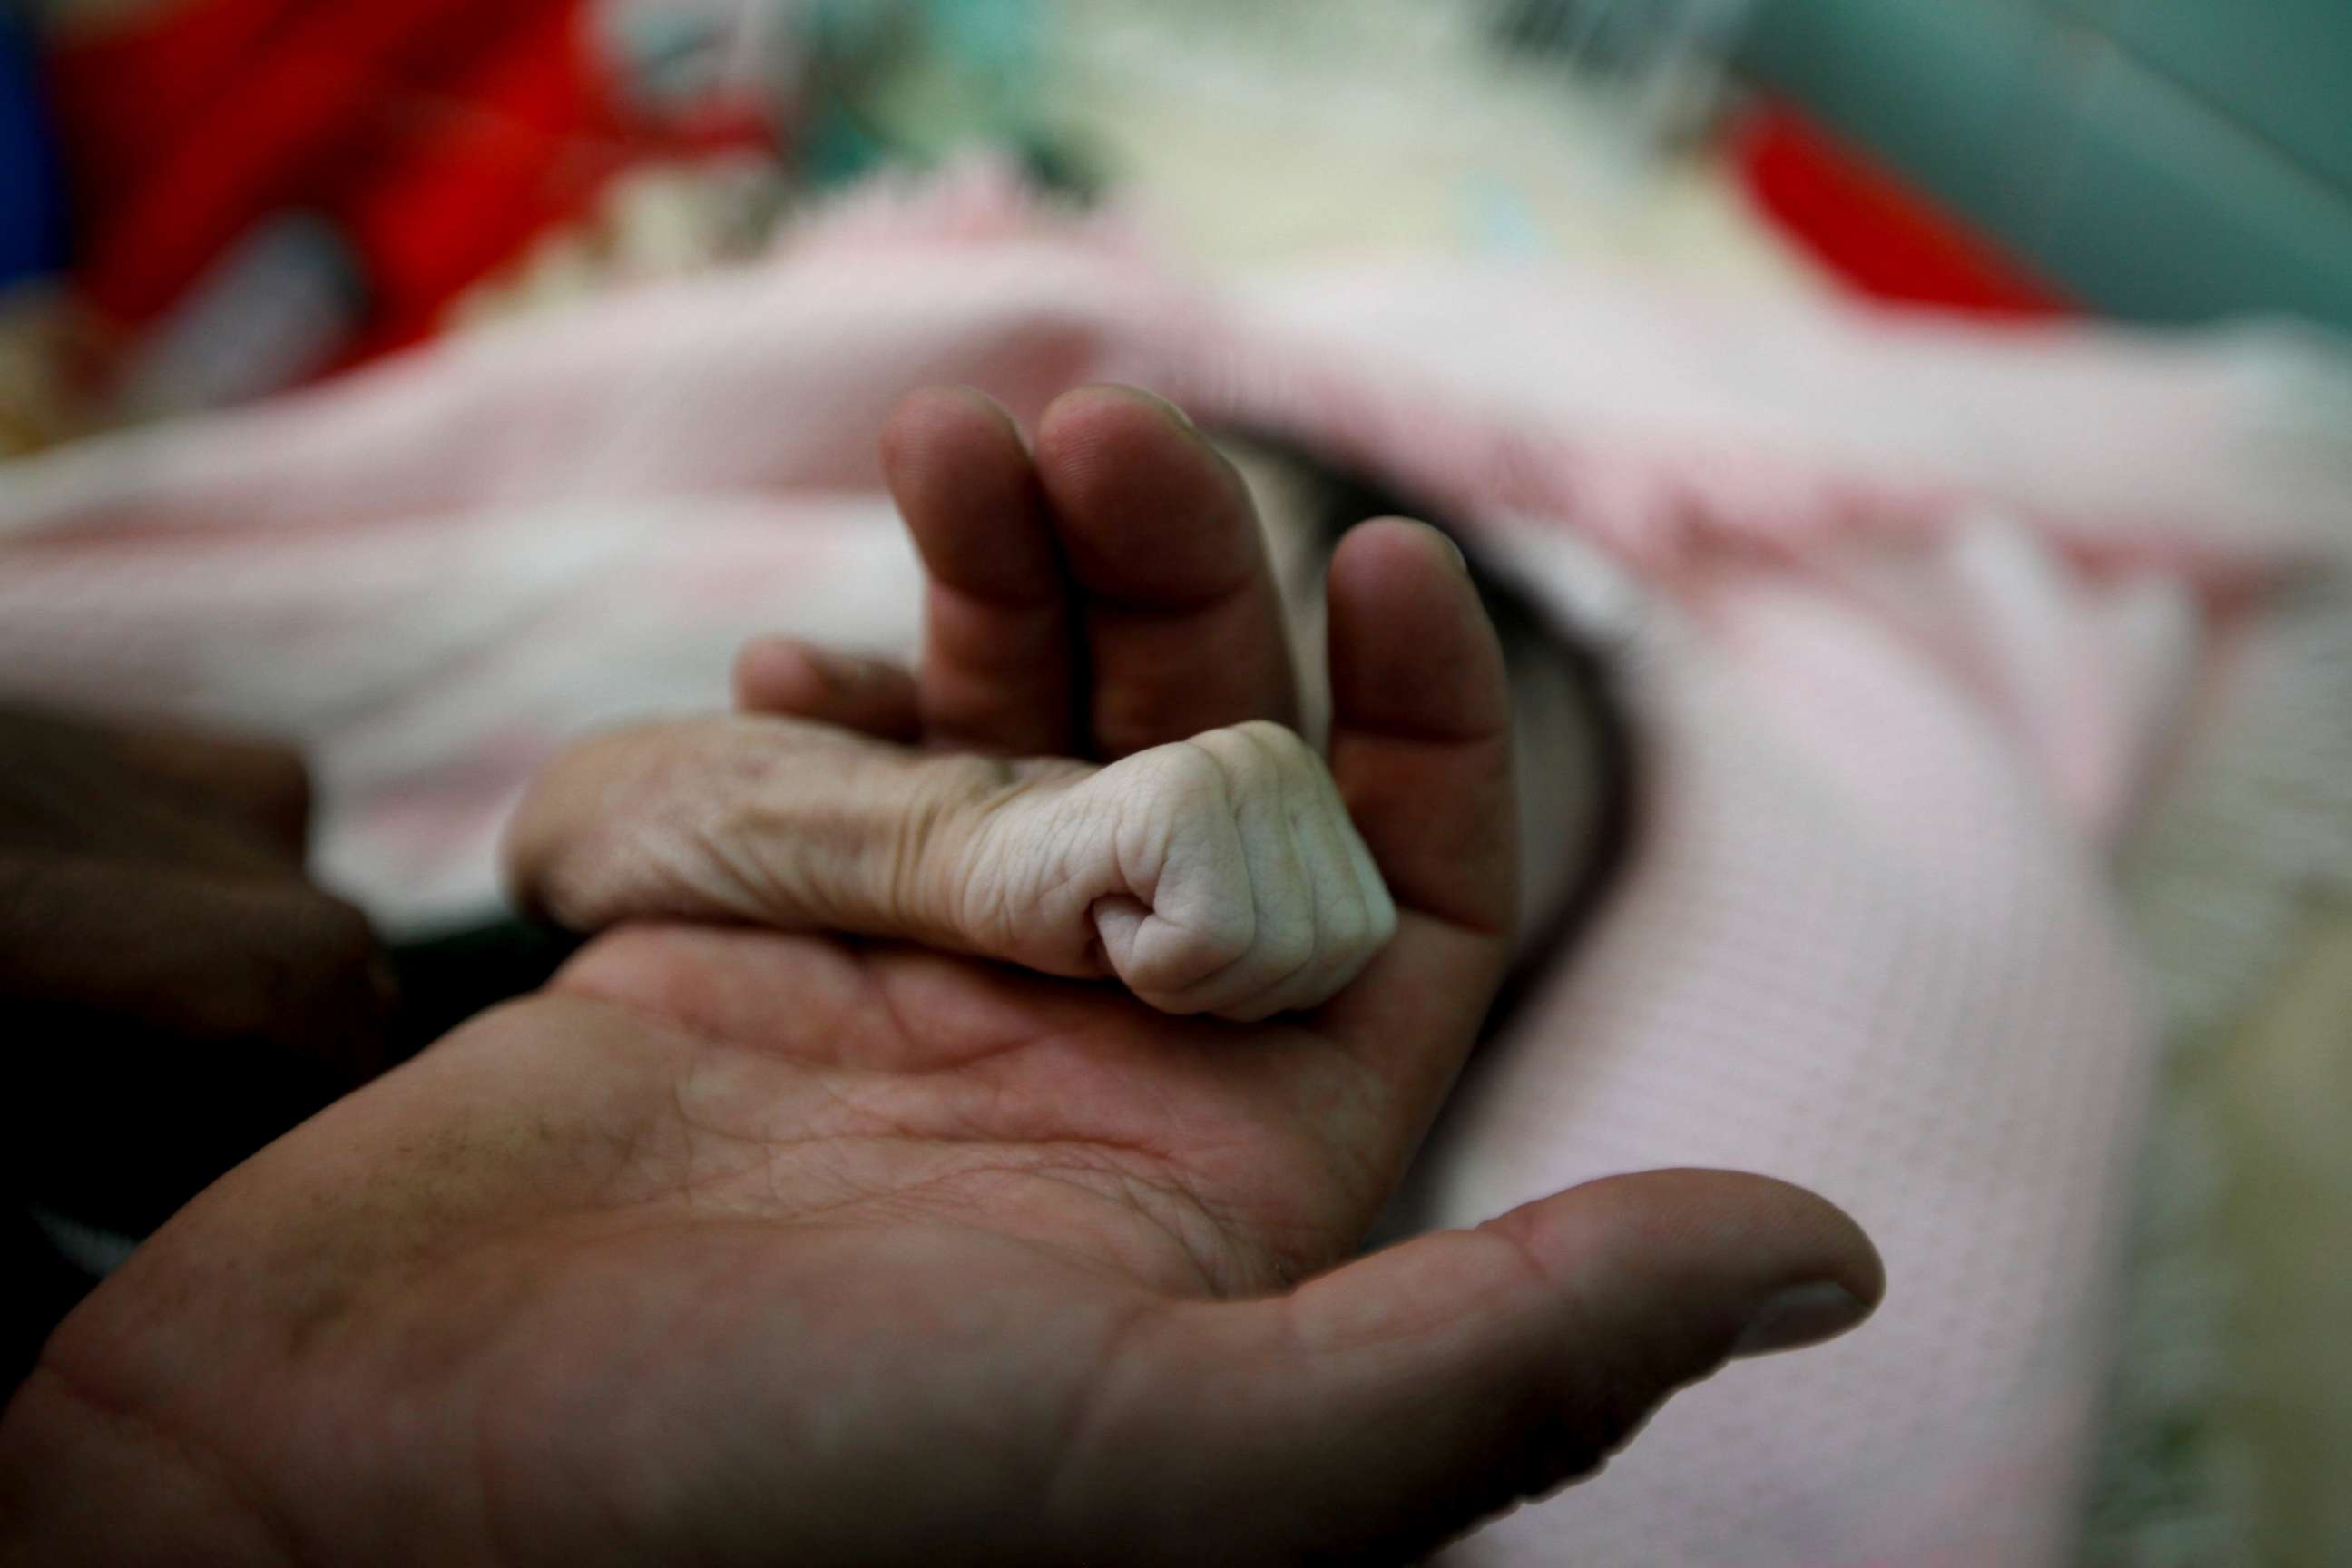 PHOTO: Saleh Hassan al-Faqeh holds the hand of his four-month-old daughter, Hajar, who died of malnutrition at the al-Sabeen hospital in Sanaa, Yemen, Nov. 15, 2018. "She was like skin on bones, her body was emaciated," he said.